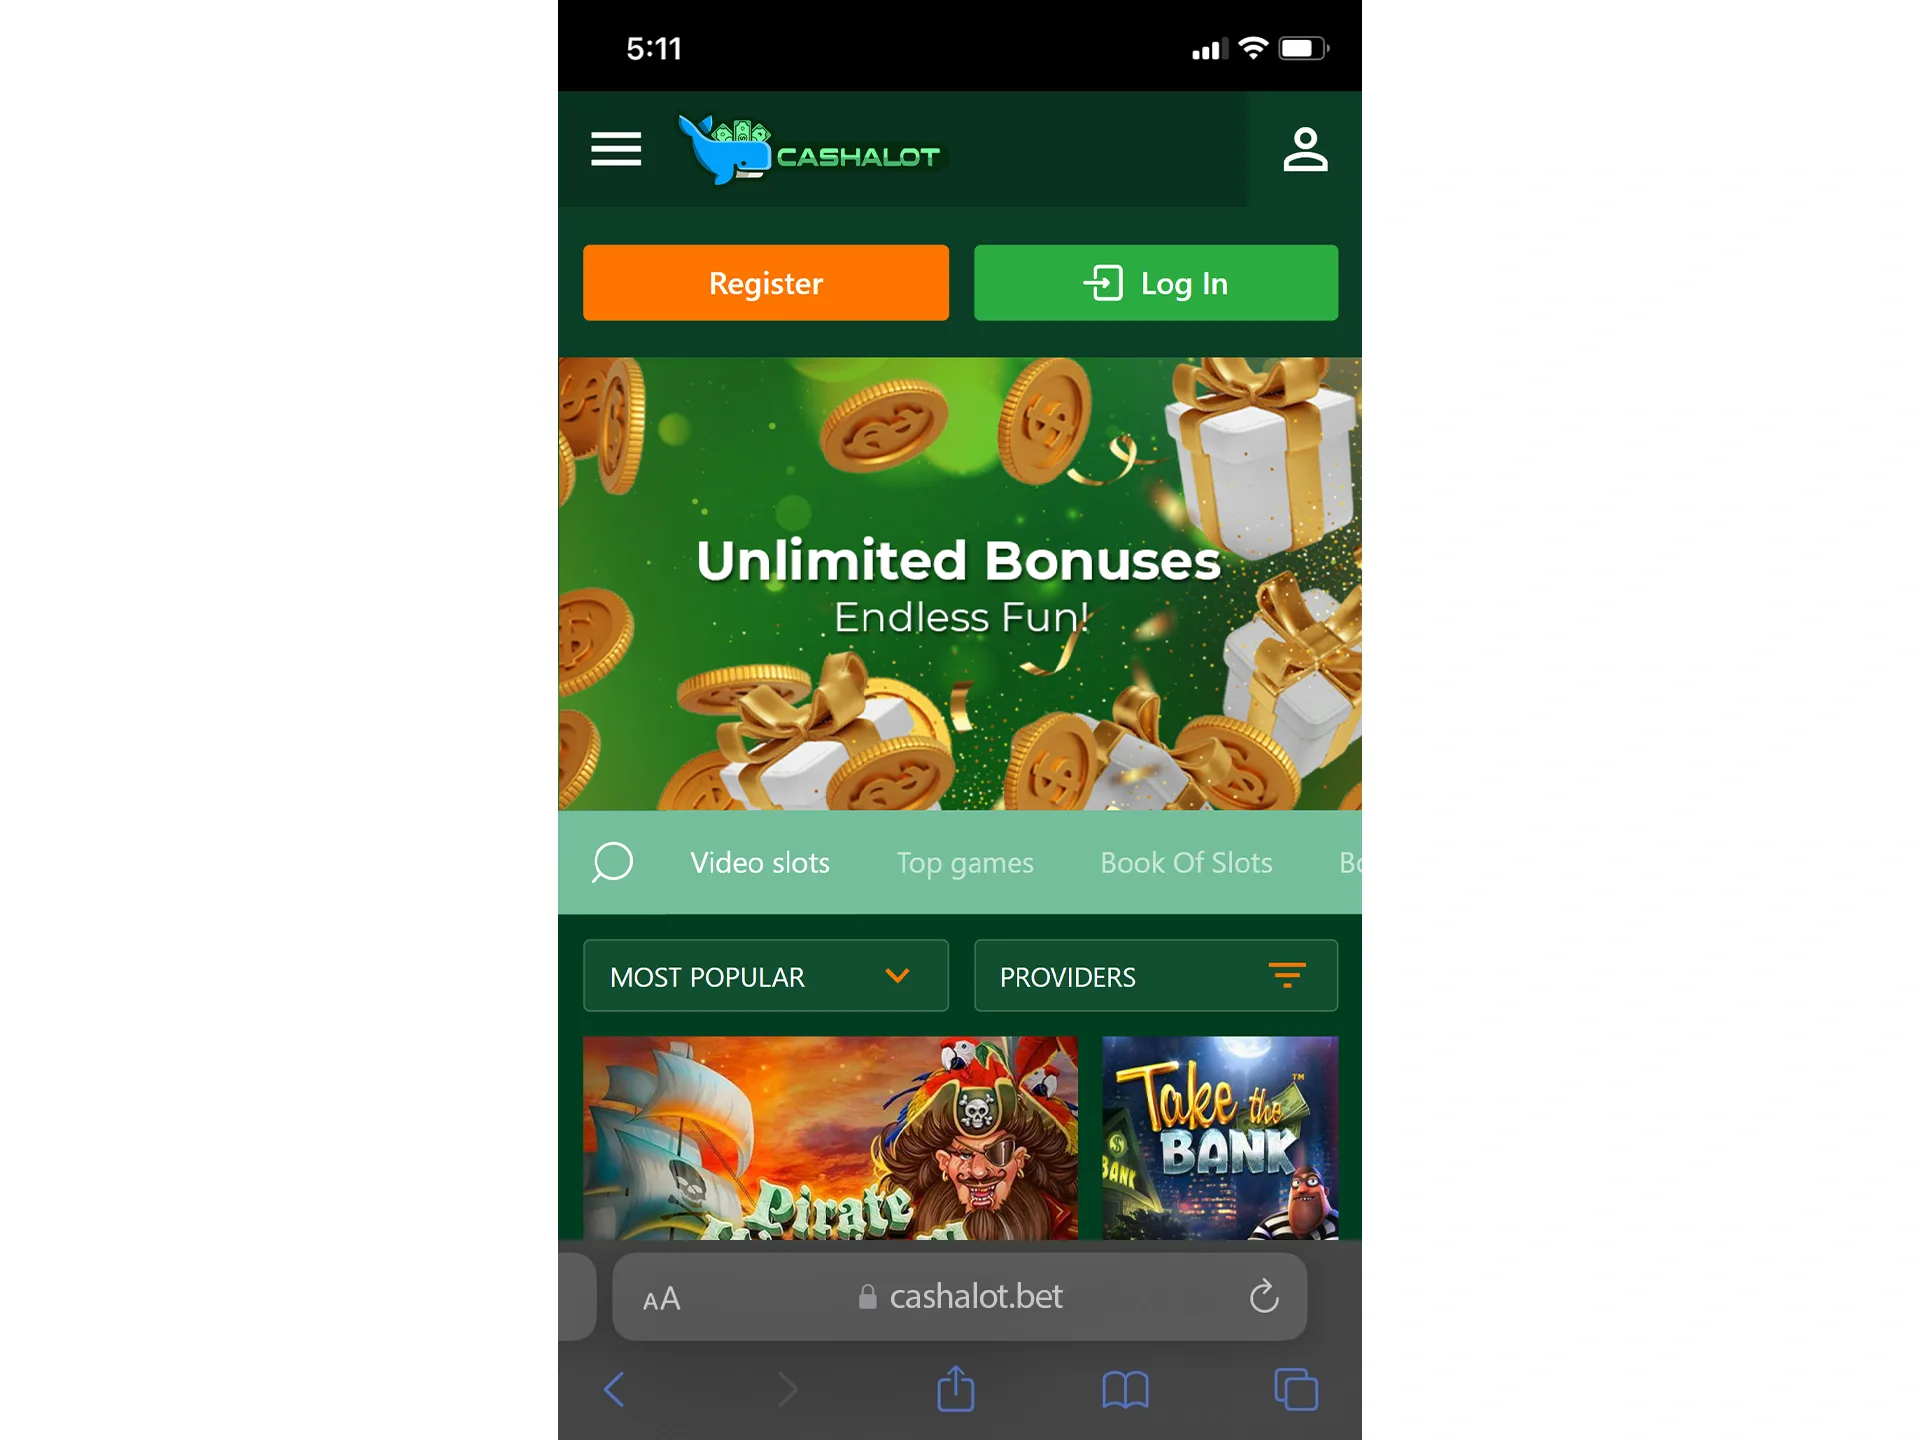 Open the official Cashalot.bet website on your iOS device.